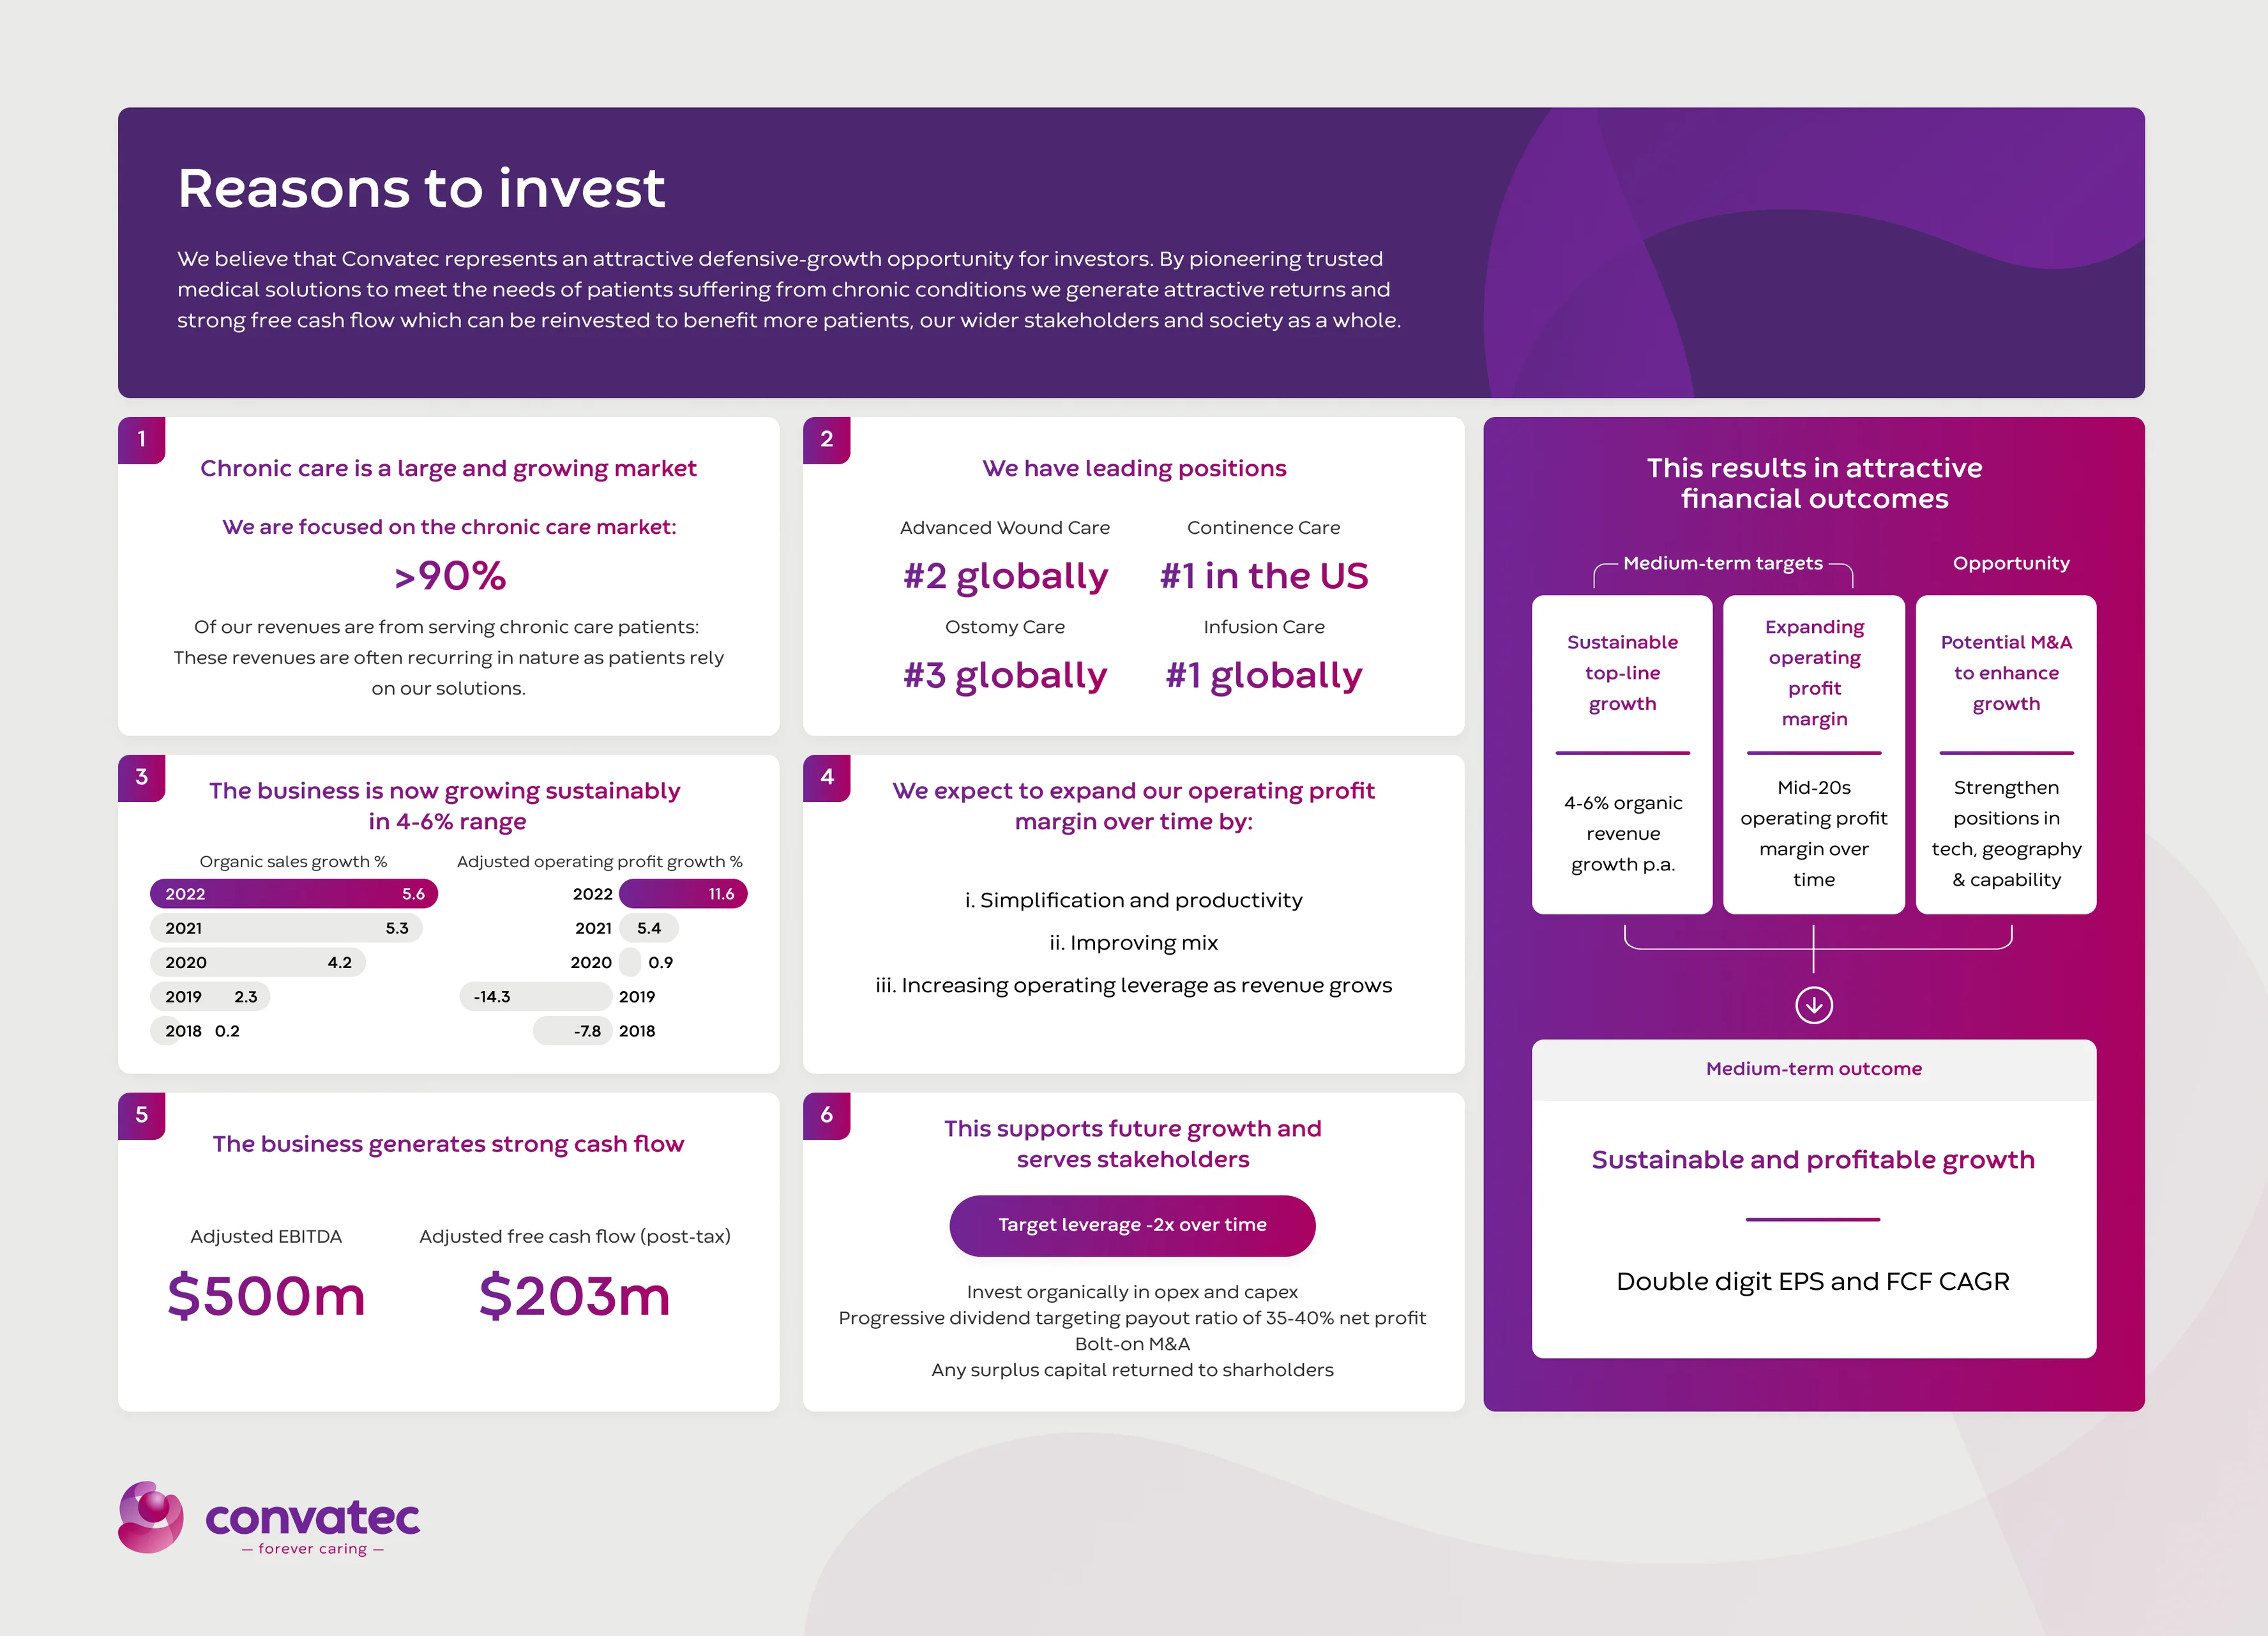 Reasons to invest infographic